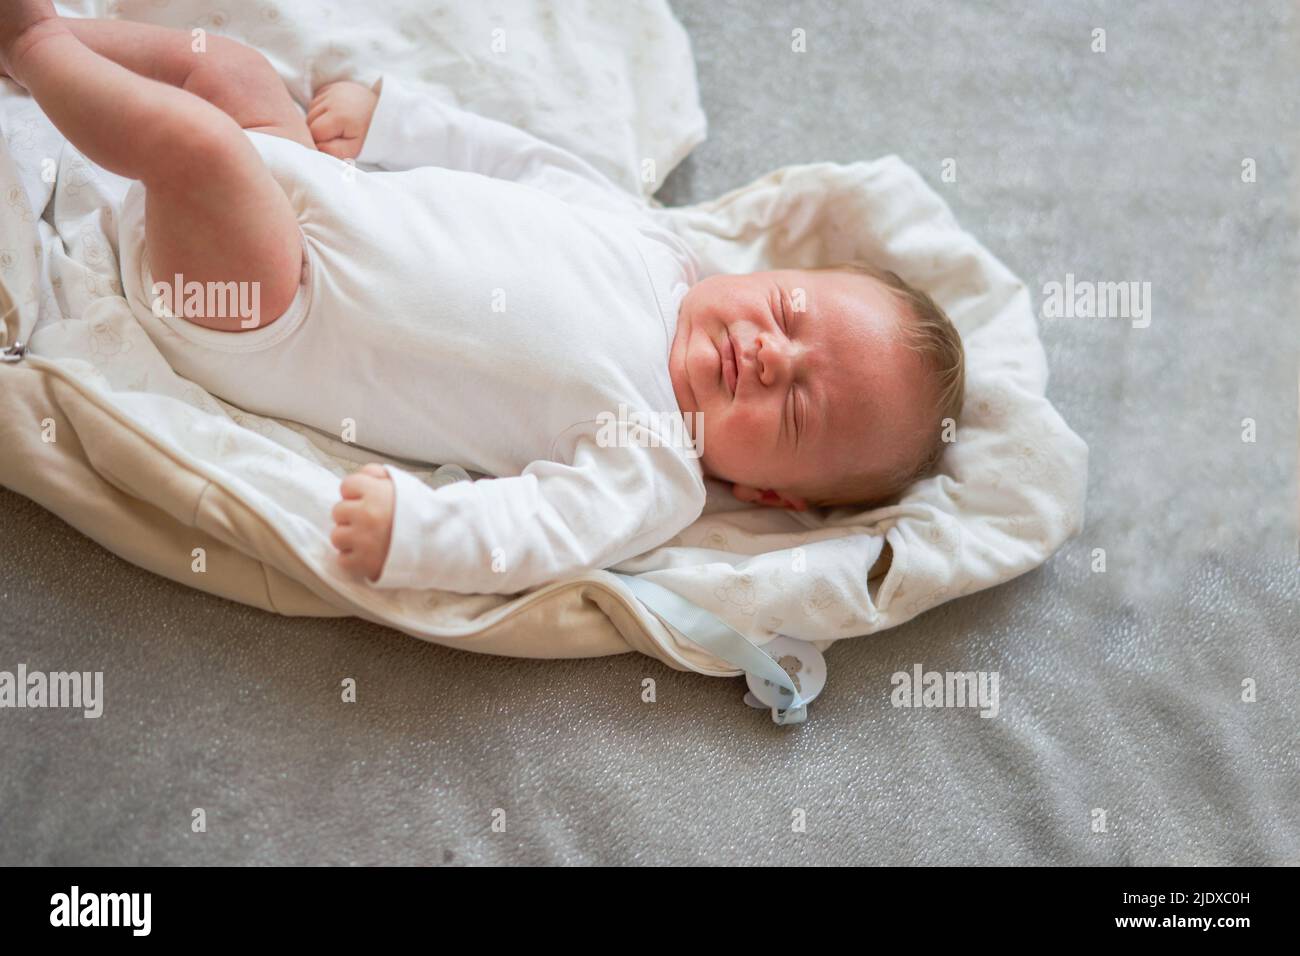 Baby Boy sleeping on bed at home Banque D'Images